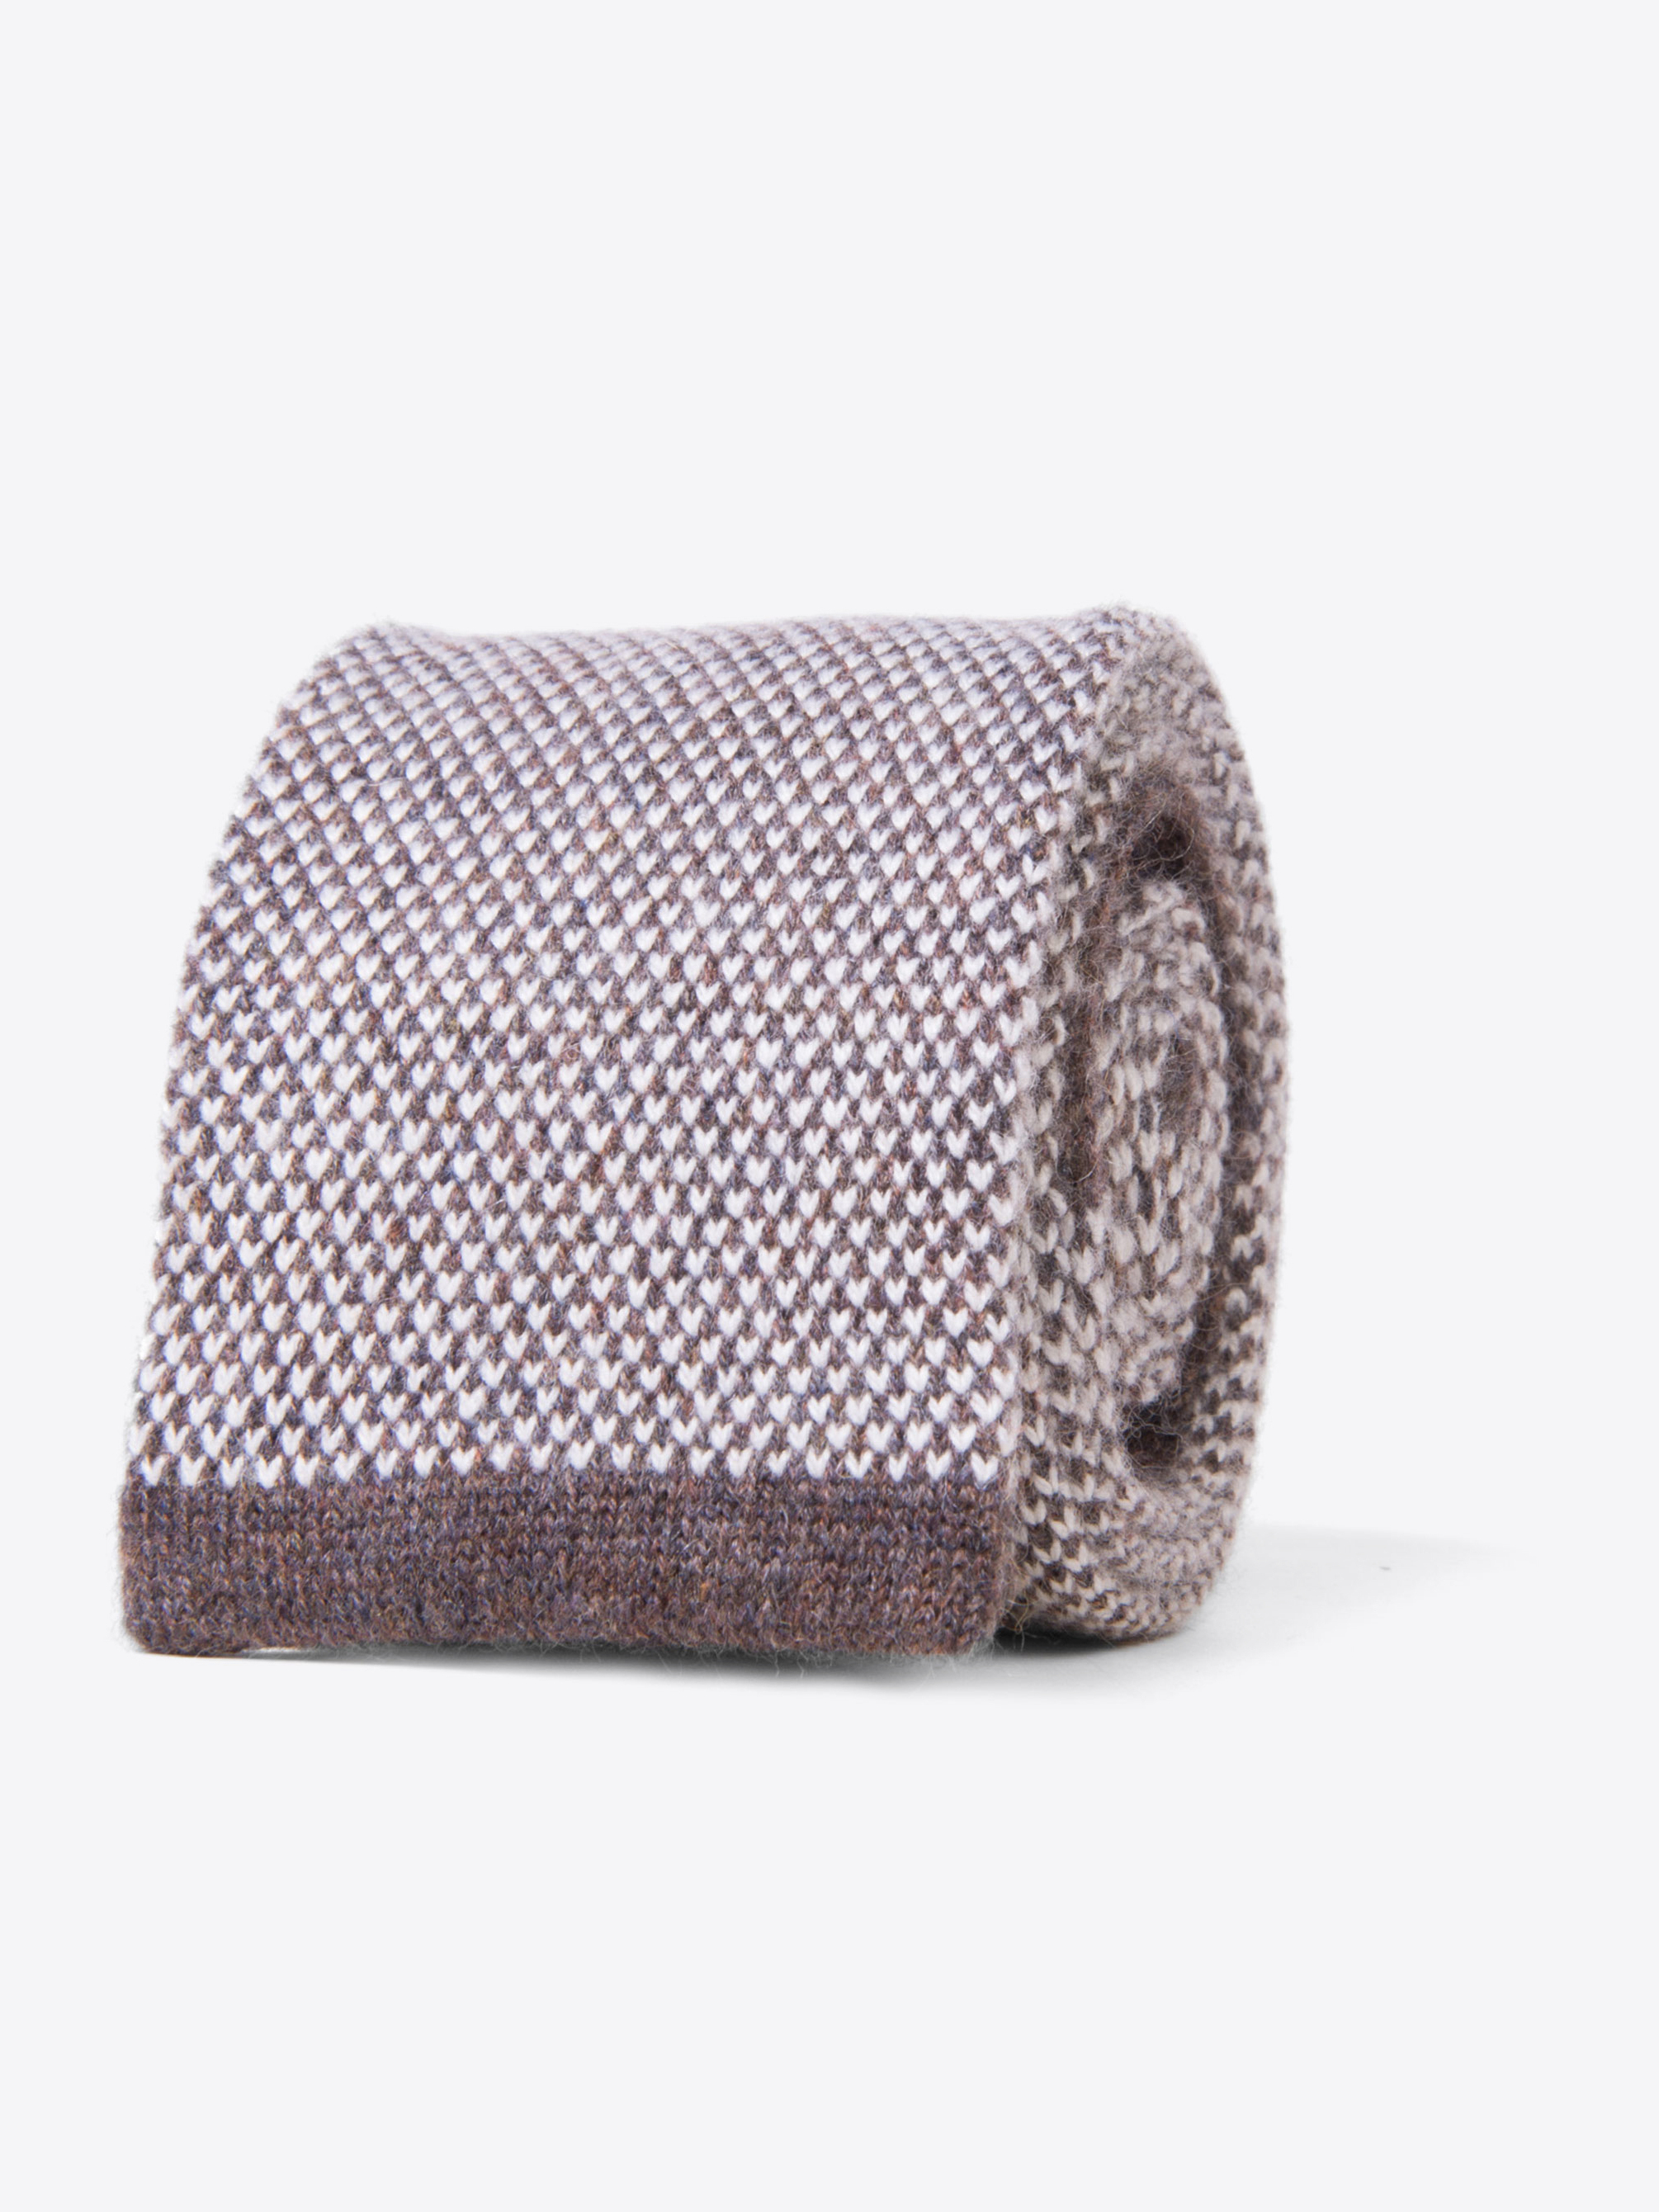 Zoom Image of Torino Brown Cashmere Knit Tie